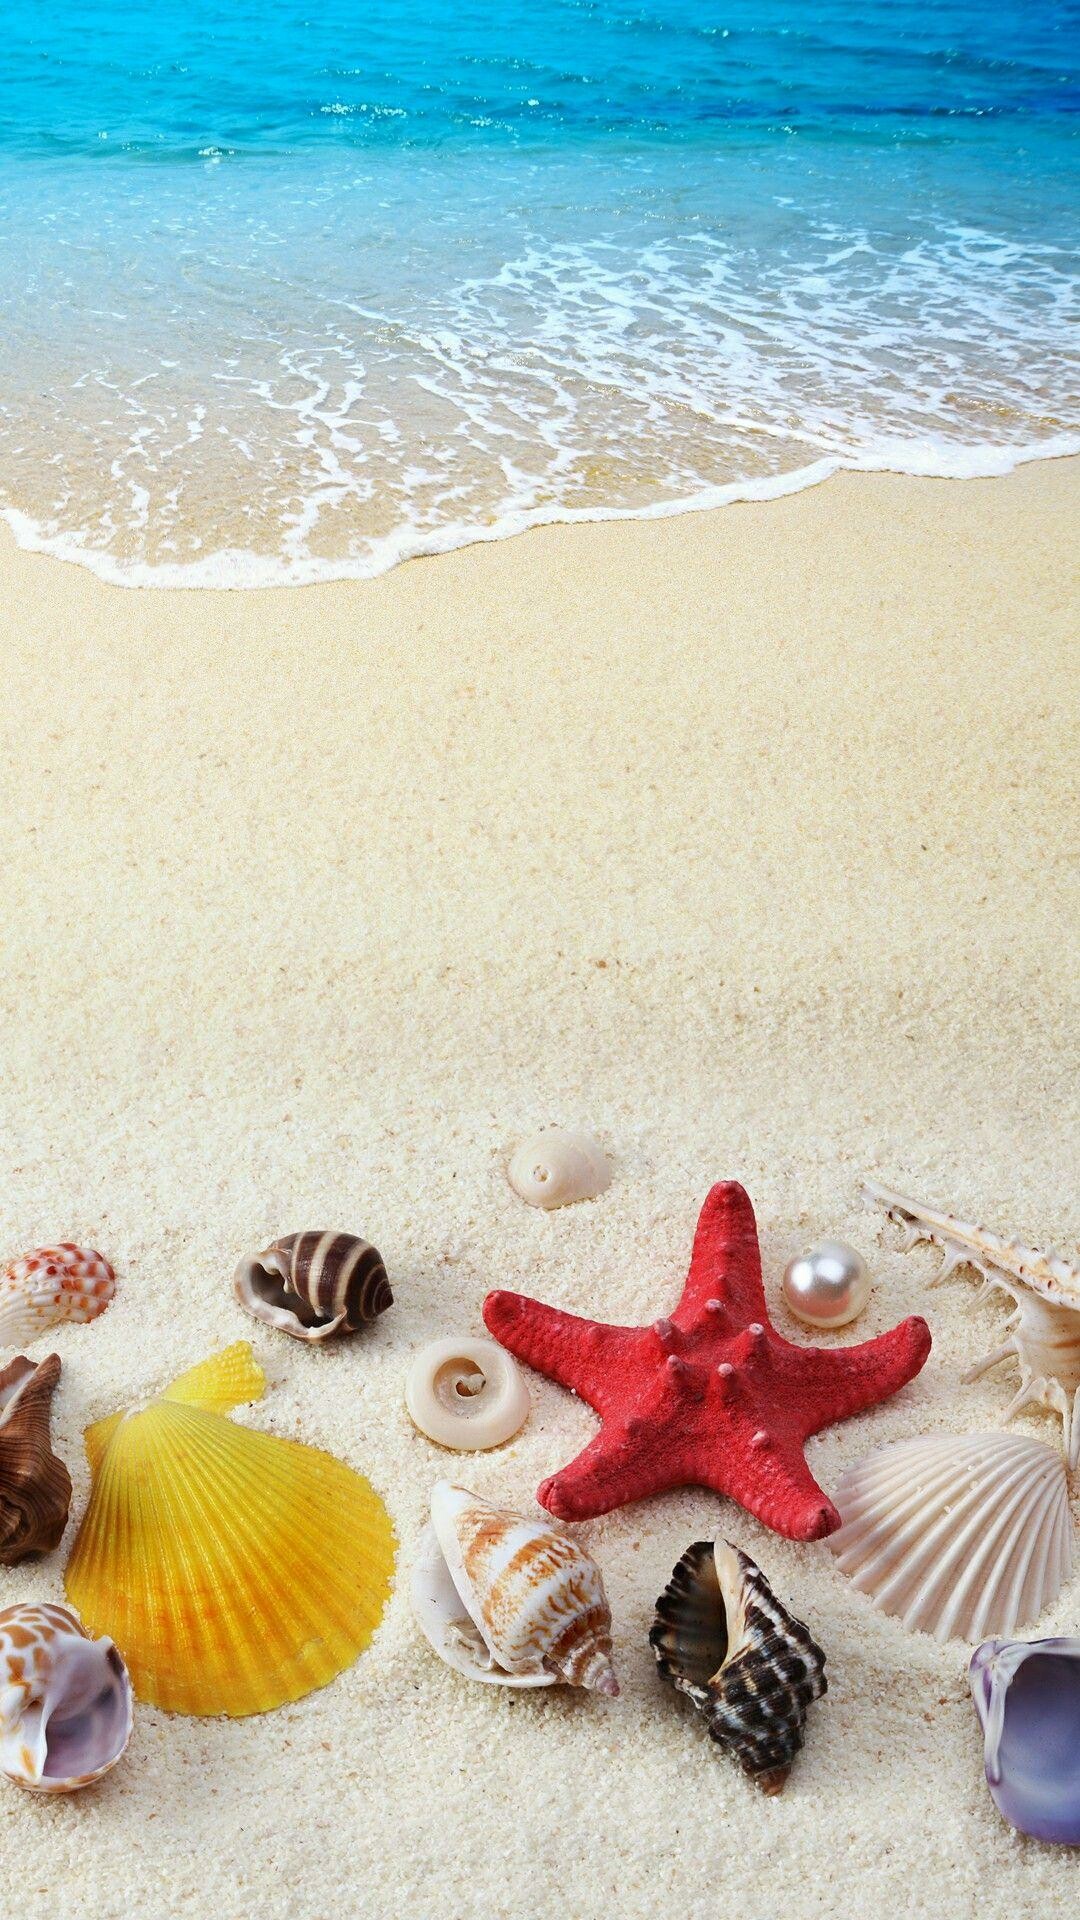 Starfish: Hd Cellphone Sea And Shells Wallpapers - Wallpaper Cave. 1080x1920 Full HD Background.